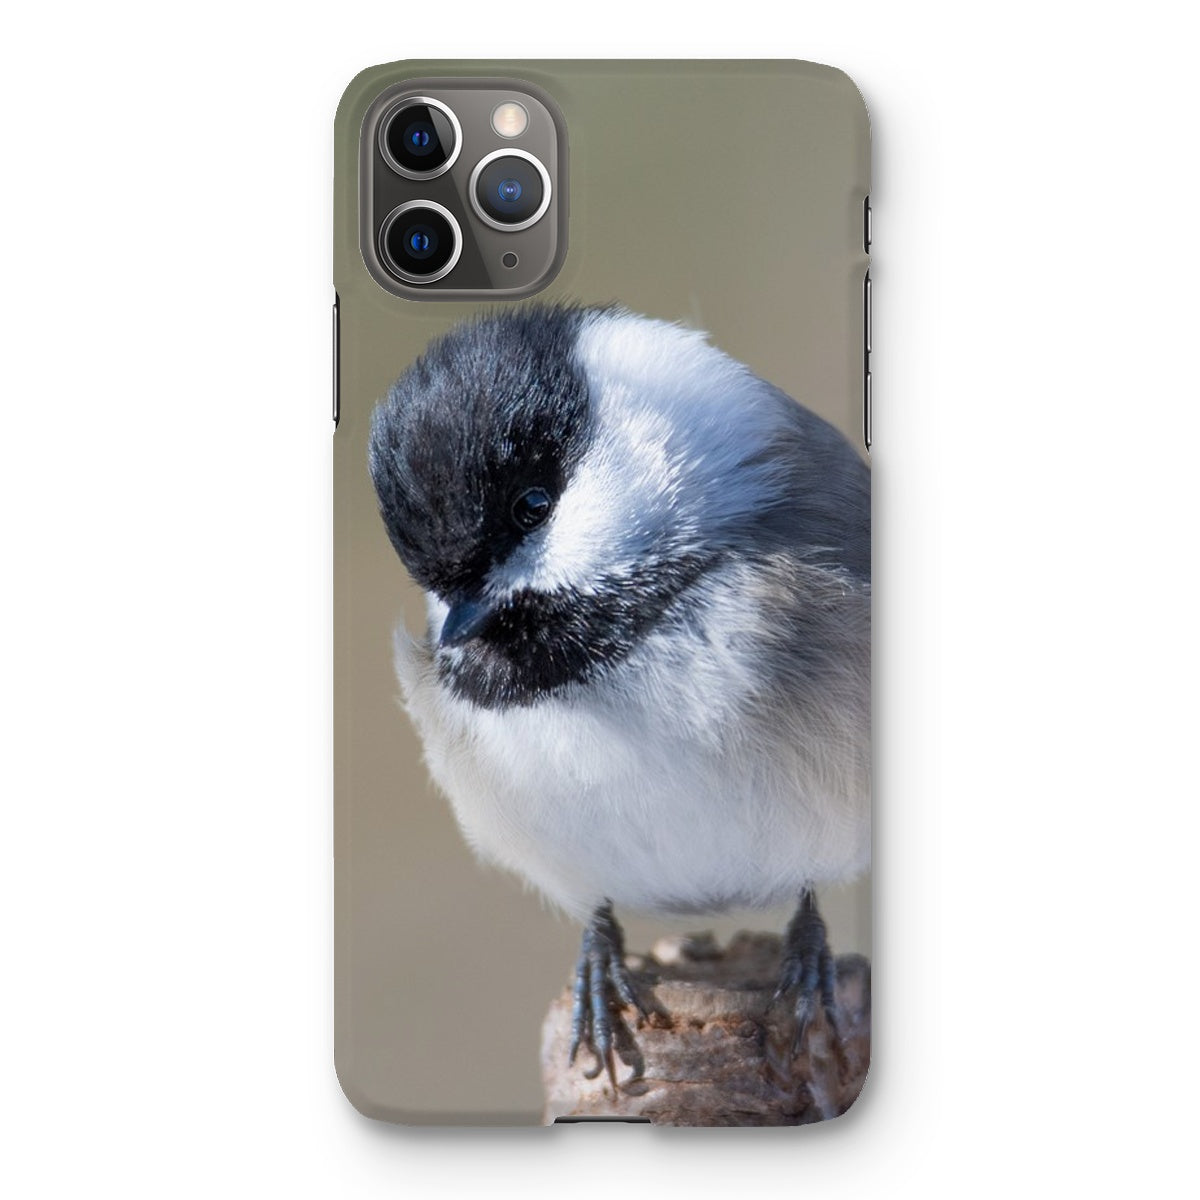 Chickadee Looking at You Snap Phone Case